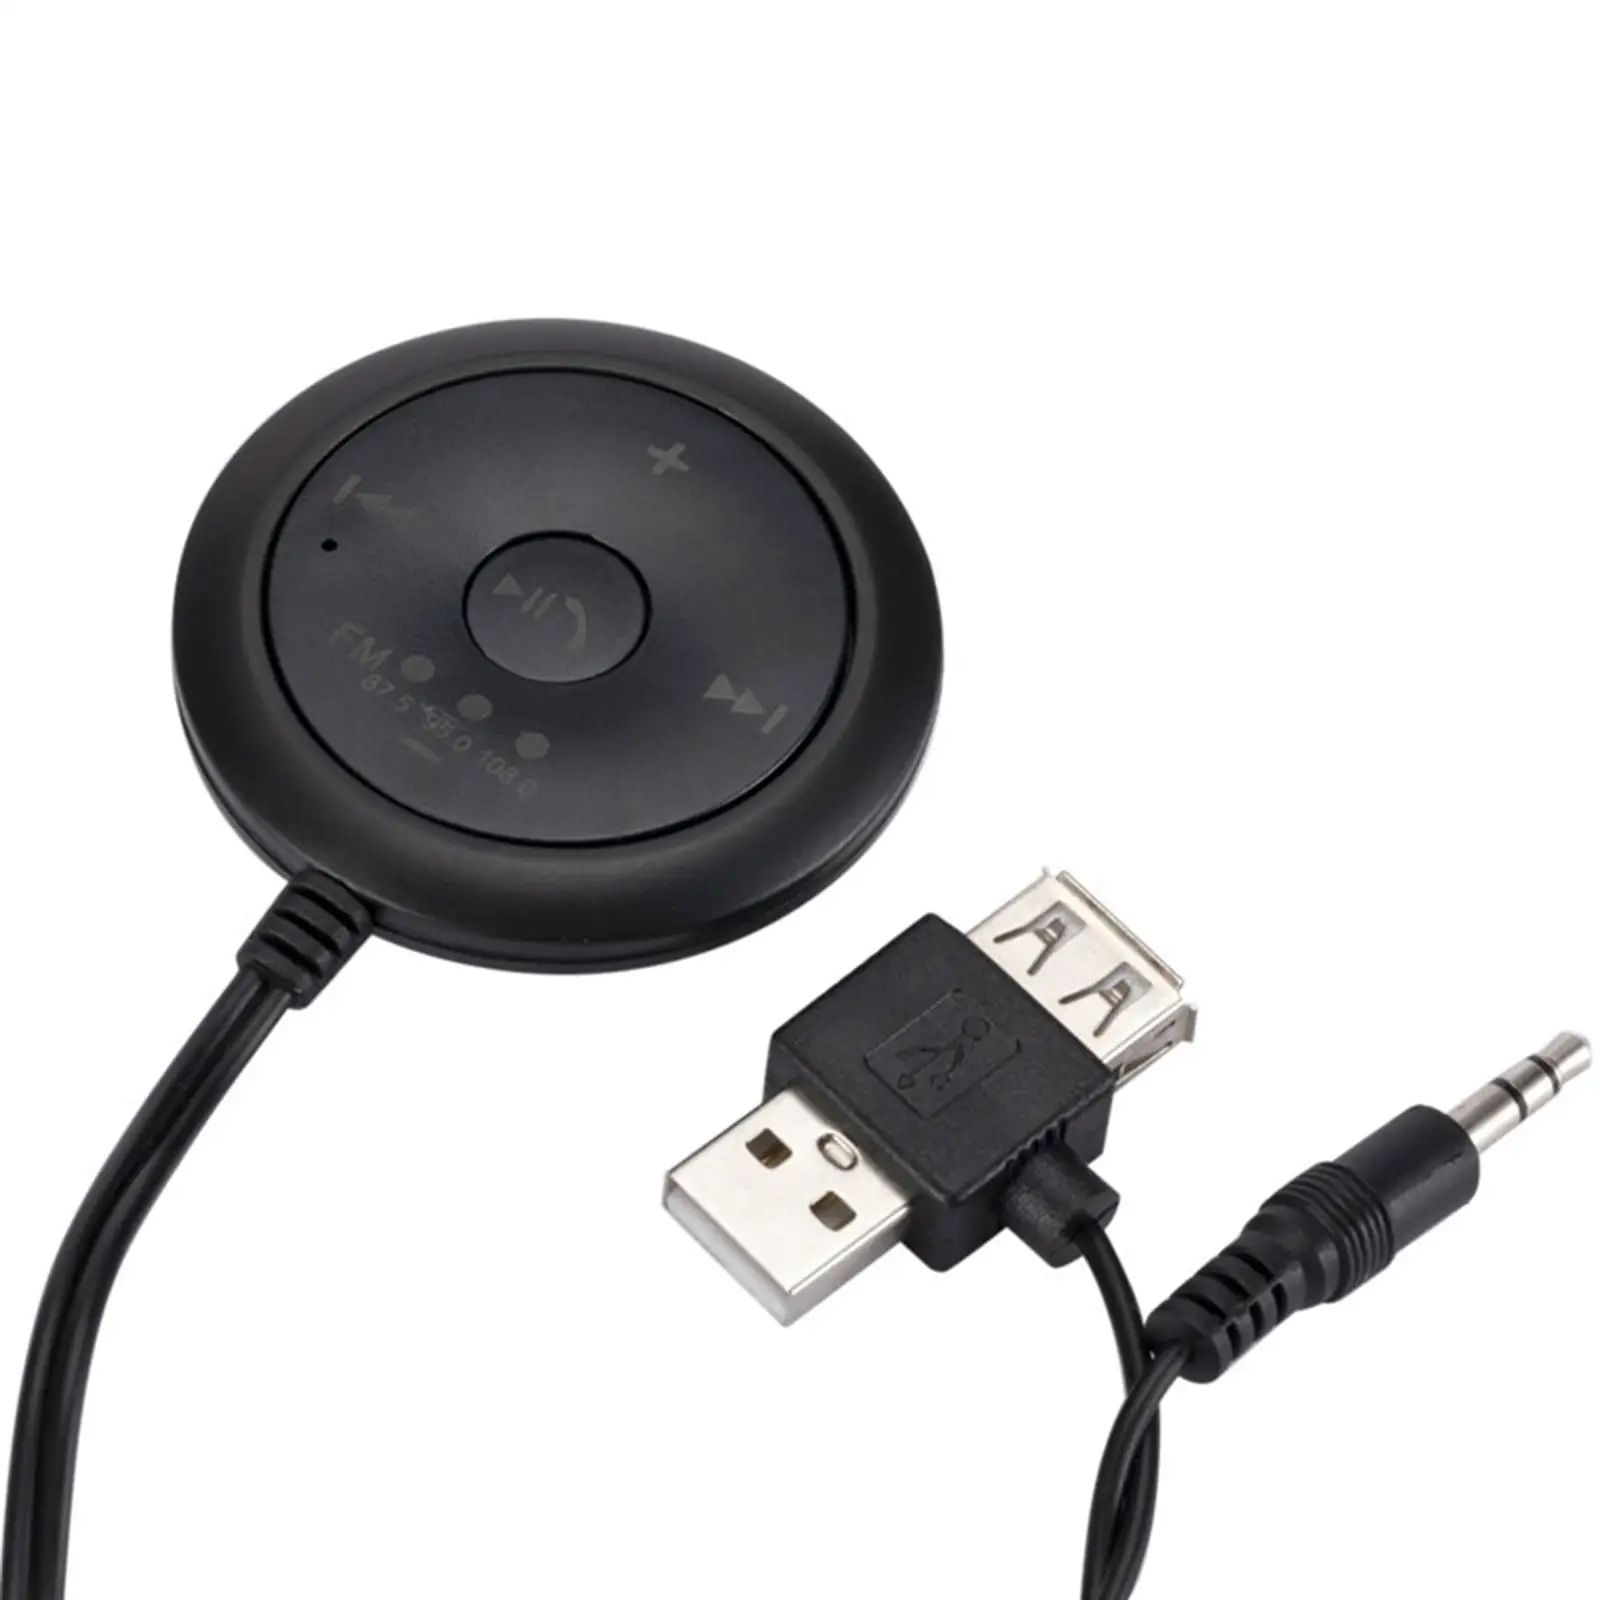 Wireless Car MP3 Player Headphones Receiver and Adapter for PC